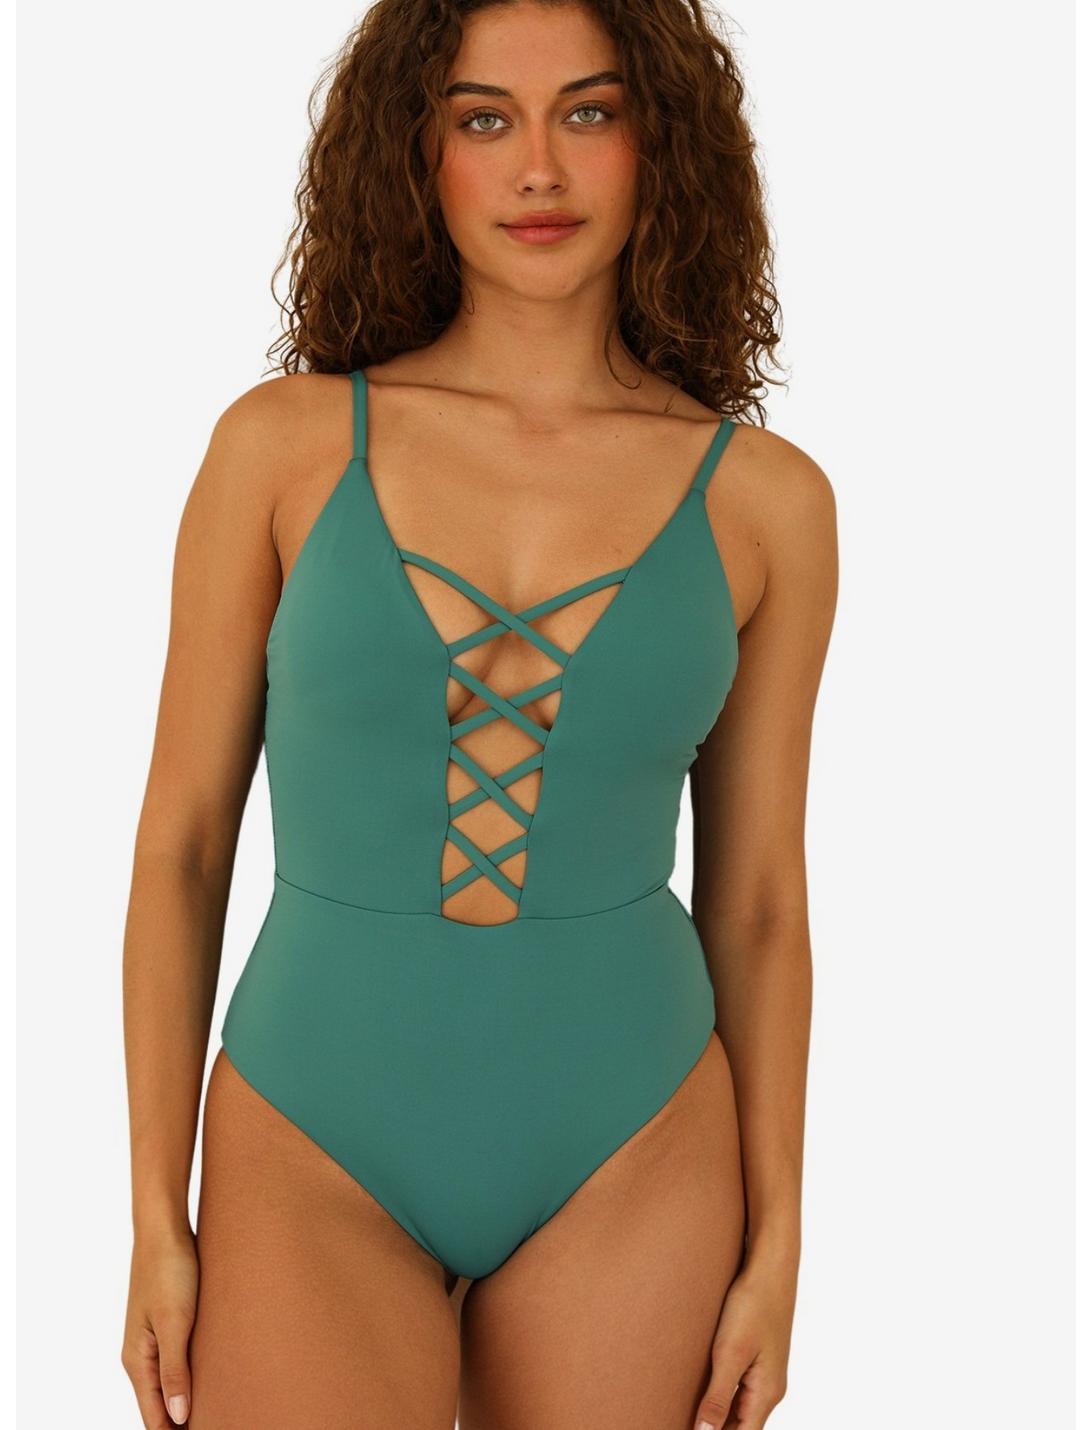 Dippin' Daisy's Bliss One Piece Blue Envy, BLUE, hi-res